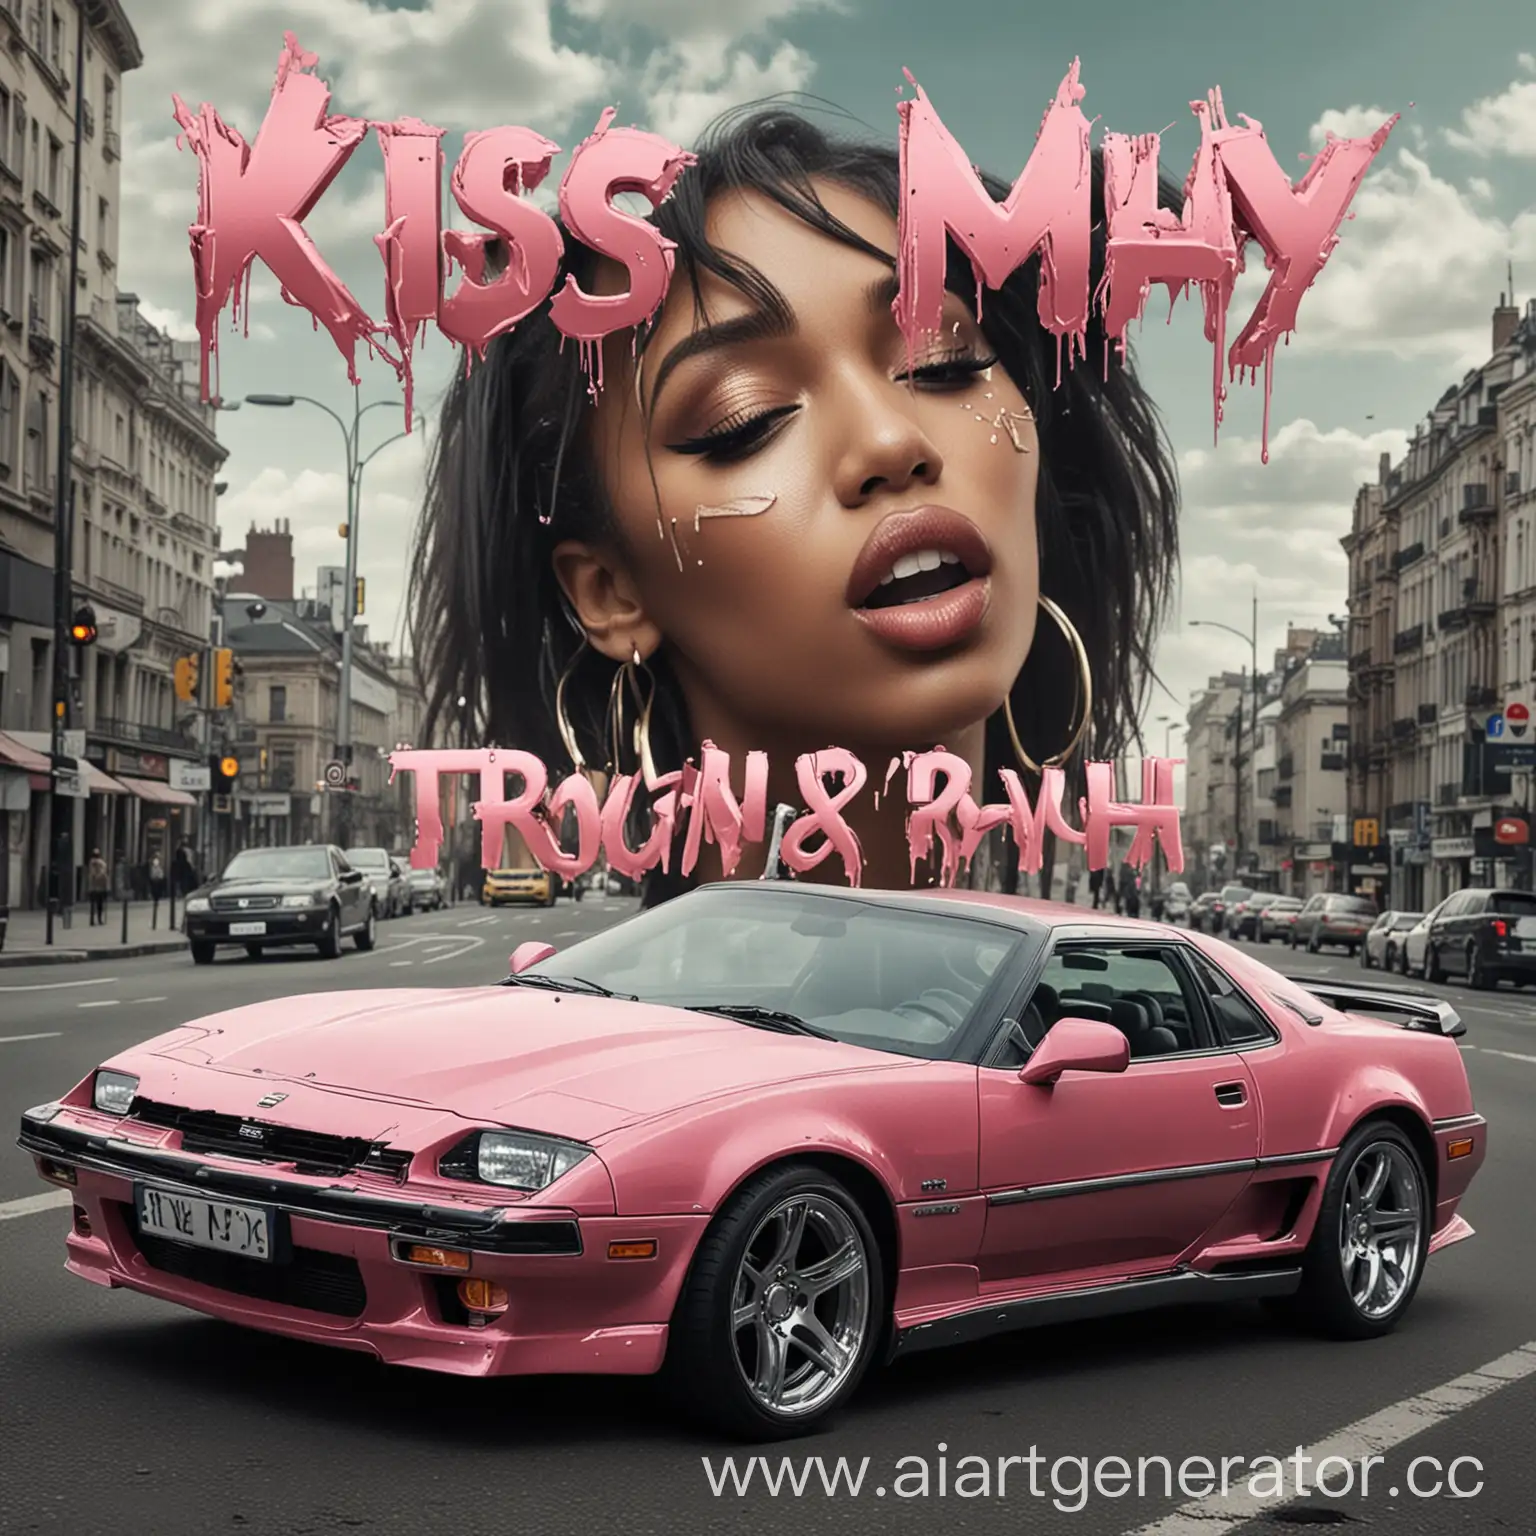 HipHop-Style-Track-Cover-KISS-MY-DAY-with-Torn-Font-Expensive-Cars-and-Girls